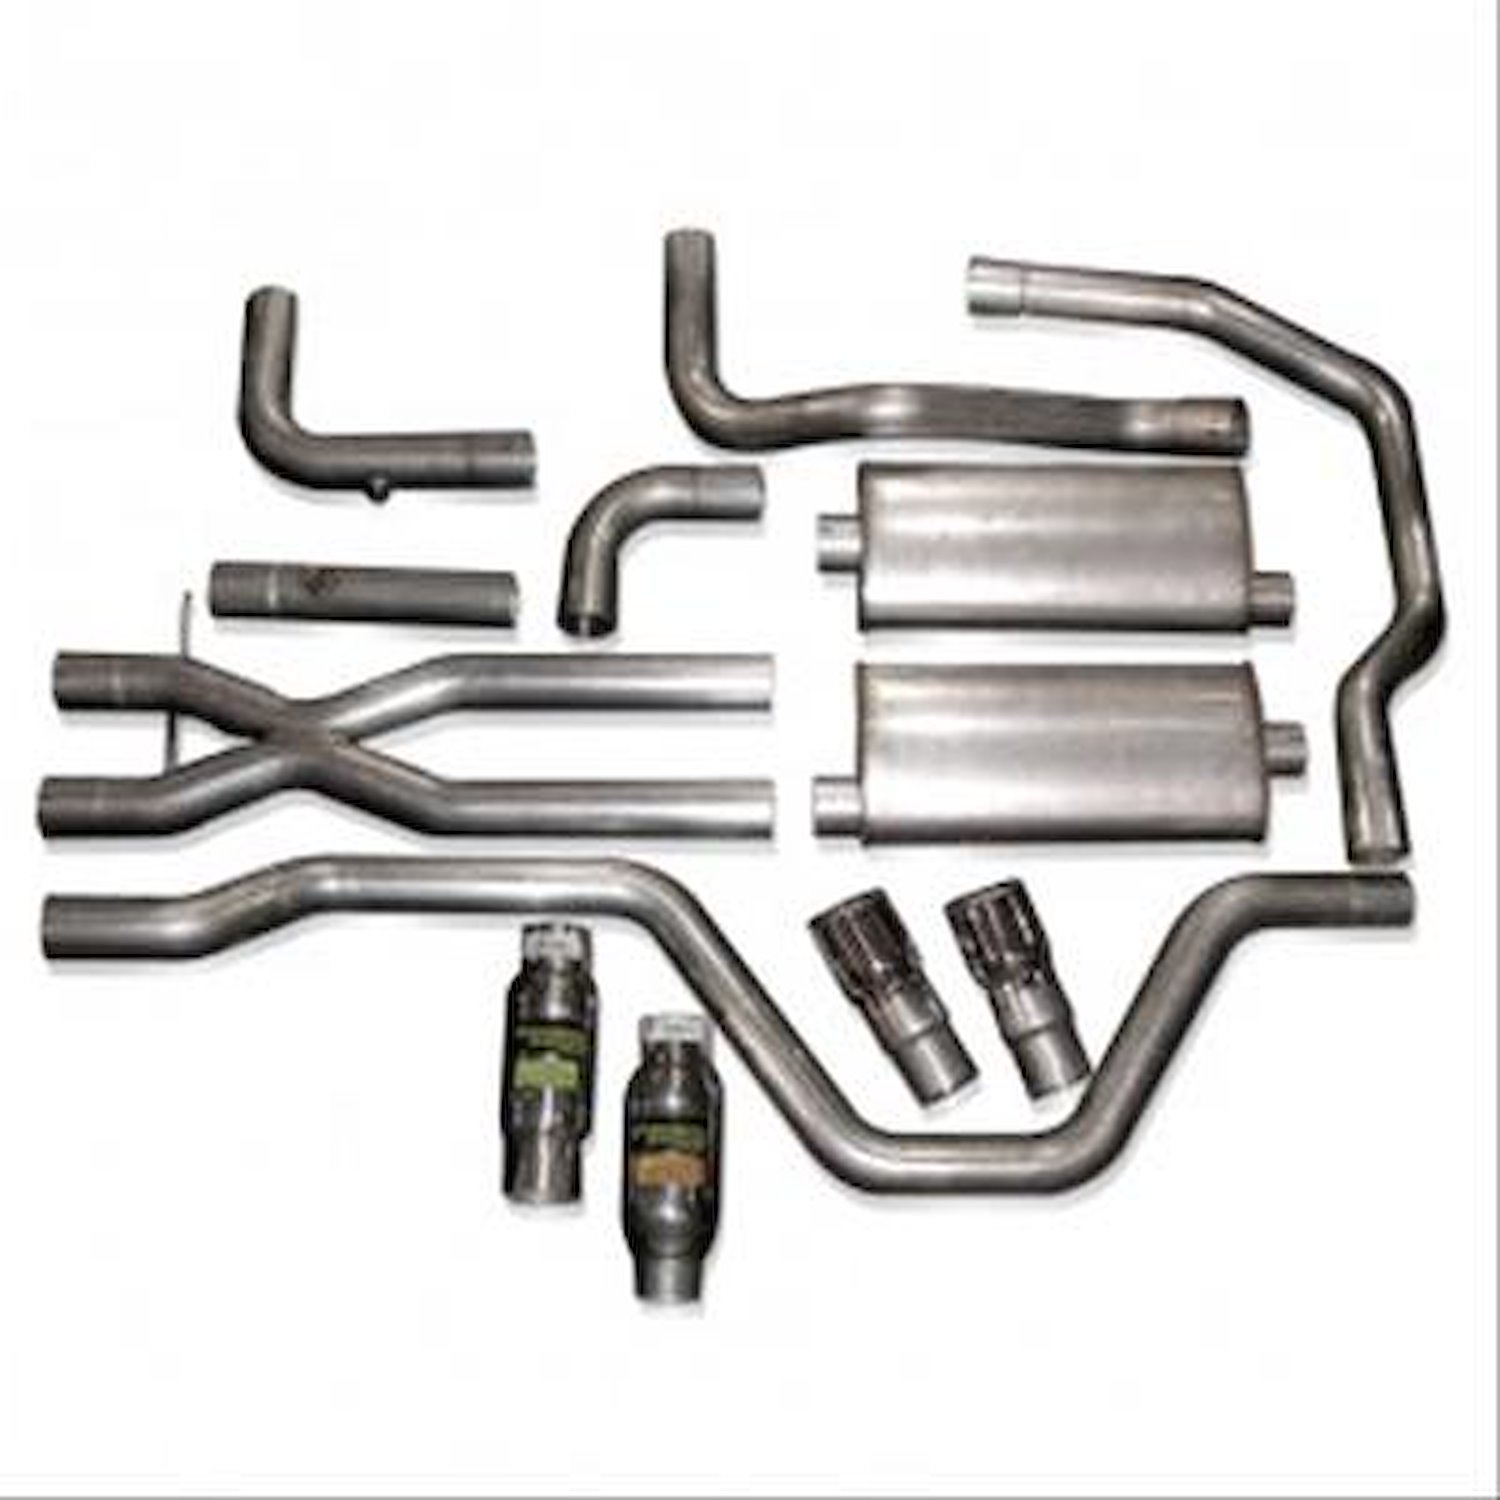 2003-2006 SSR True Dual exhaust system with offroad leadpipes. For use with Stainless Works SSR head